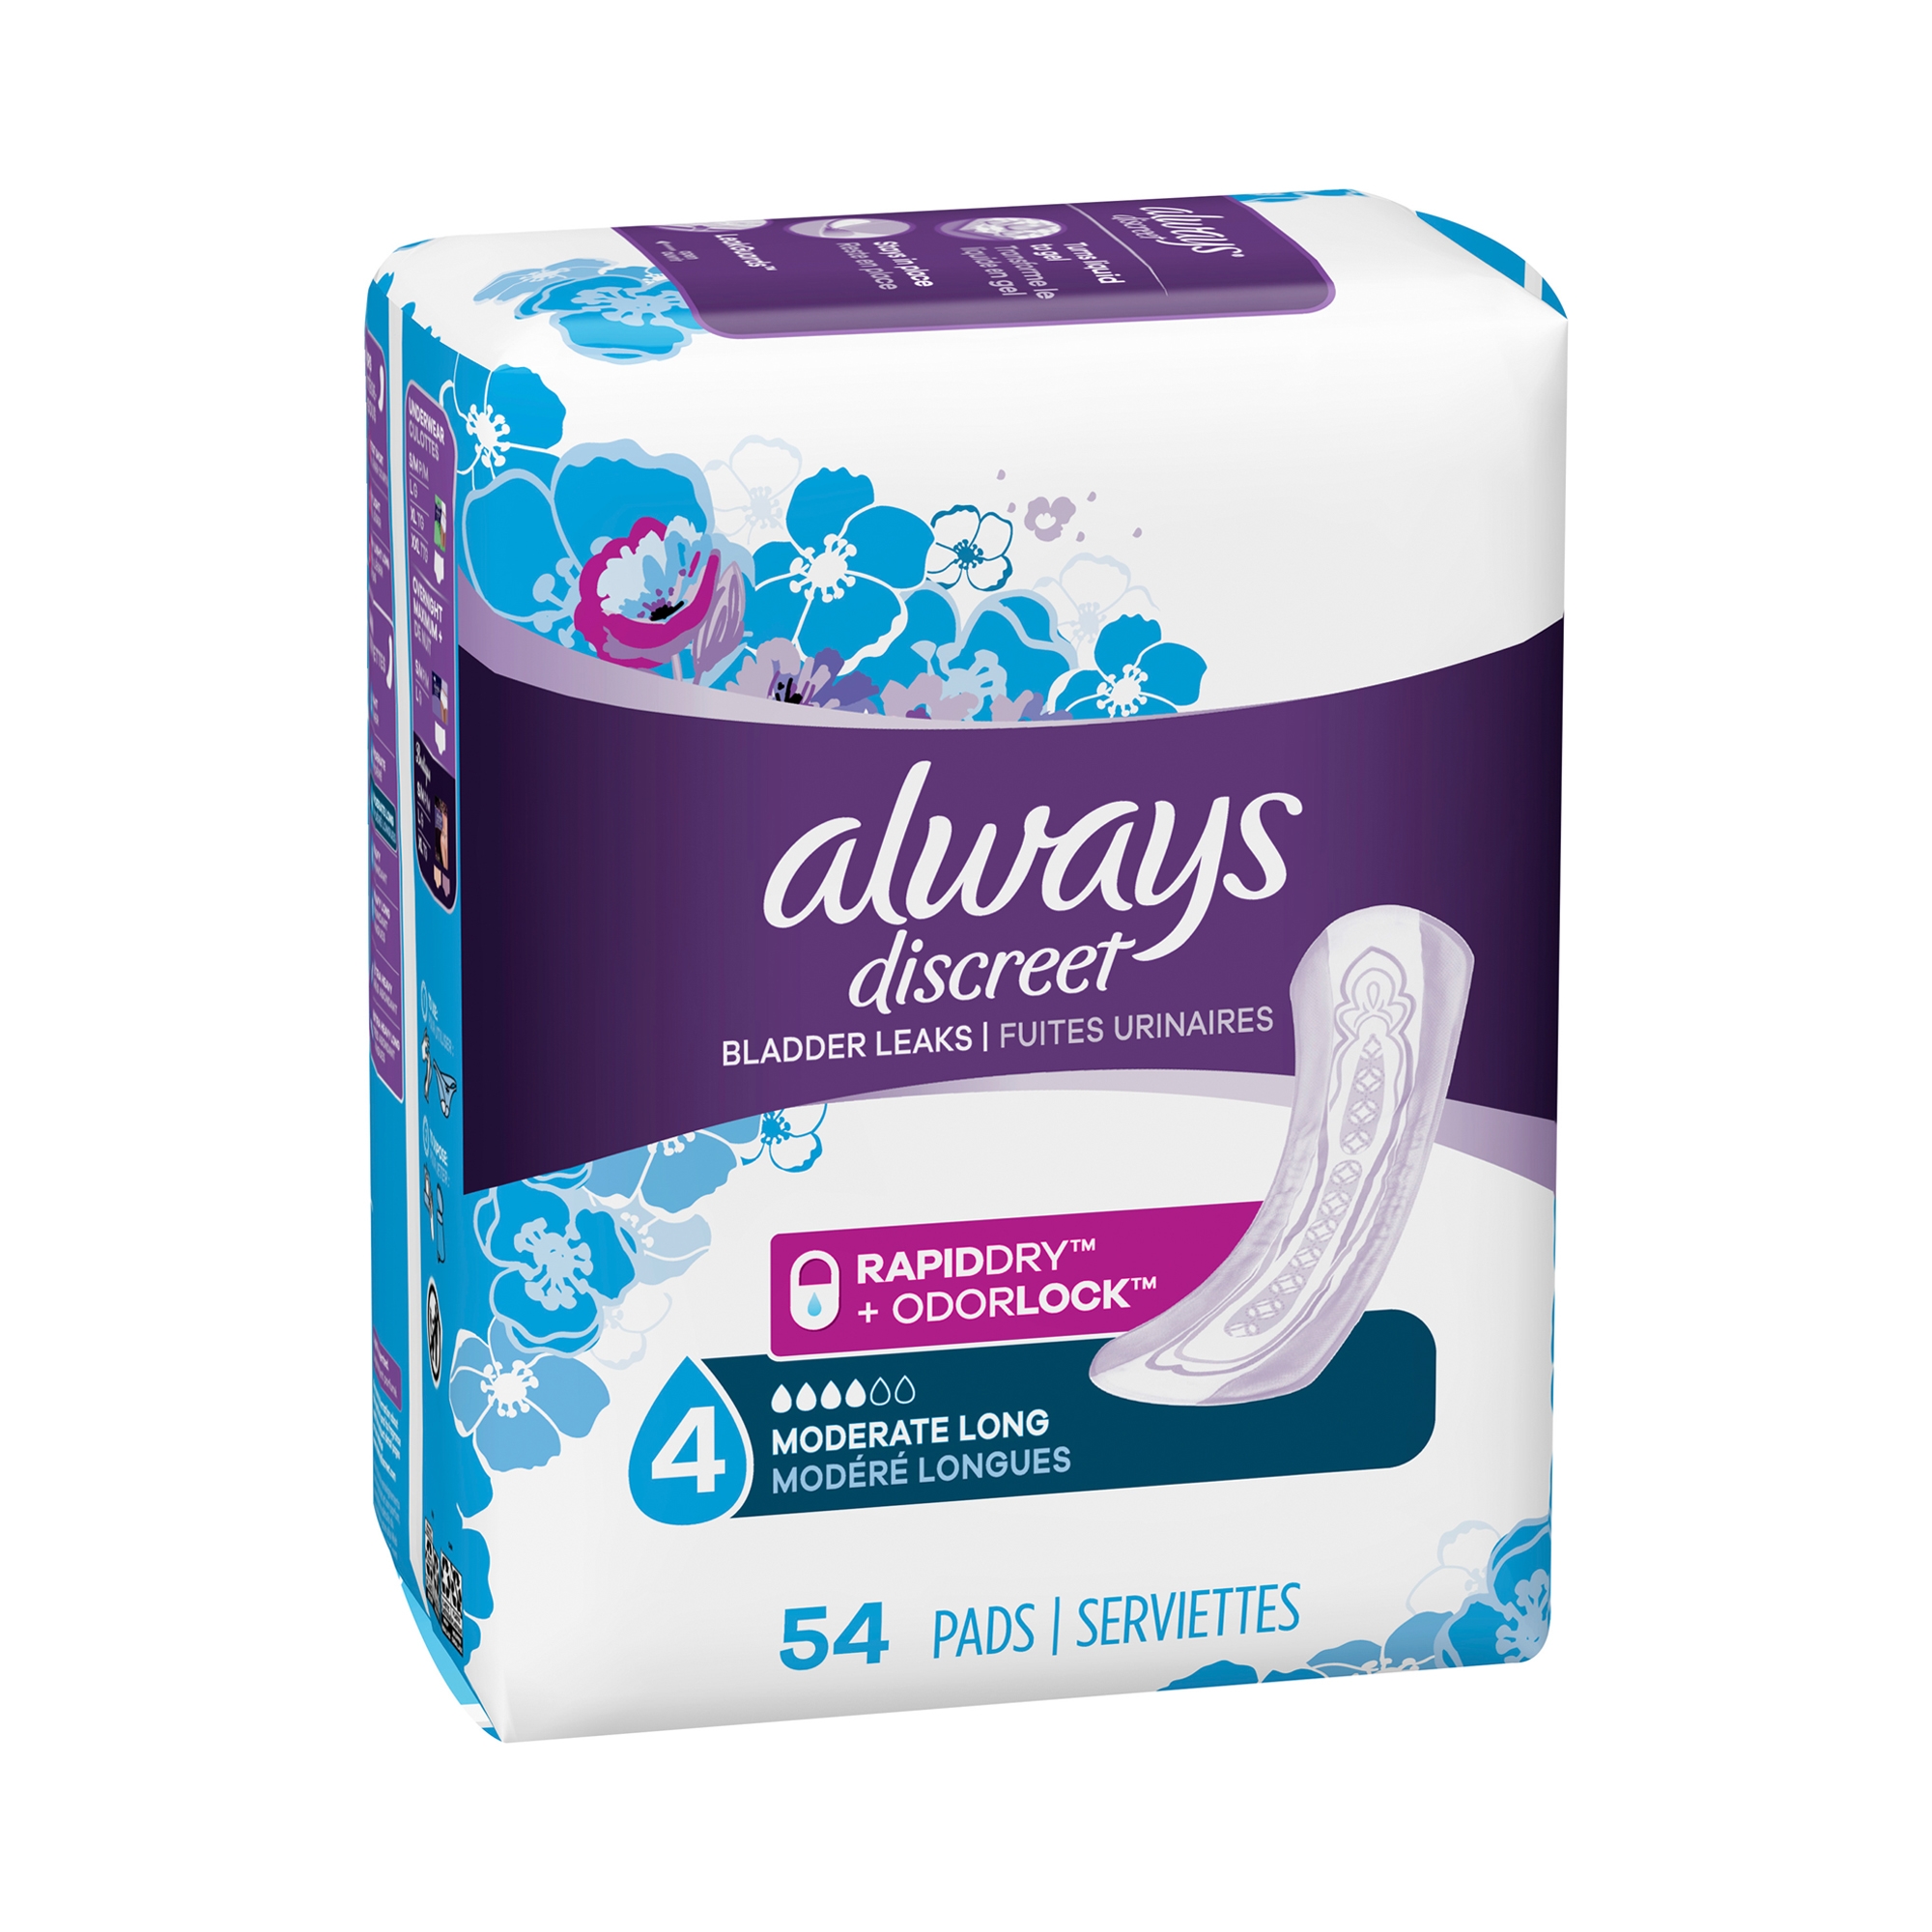 https://www.personallydelivered.com/uploads/products/always-discreet-bladder-control-pads.jpg